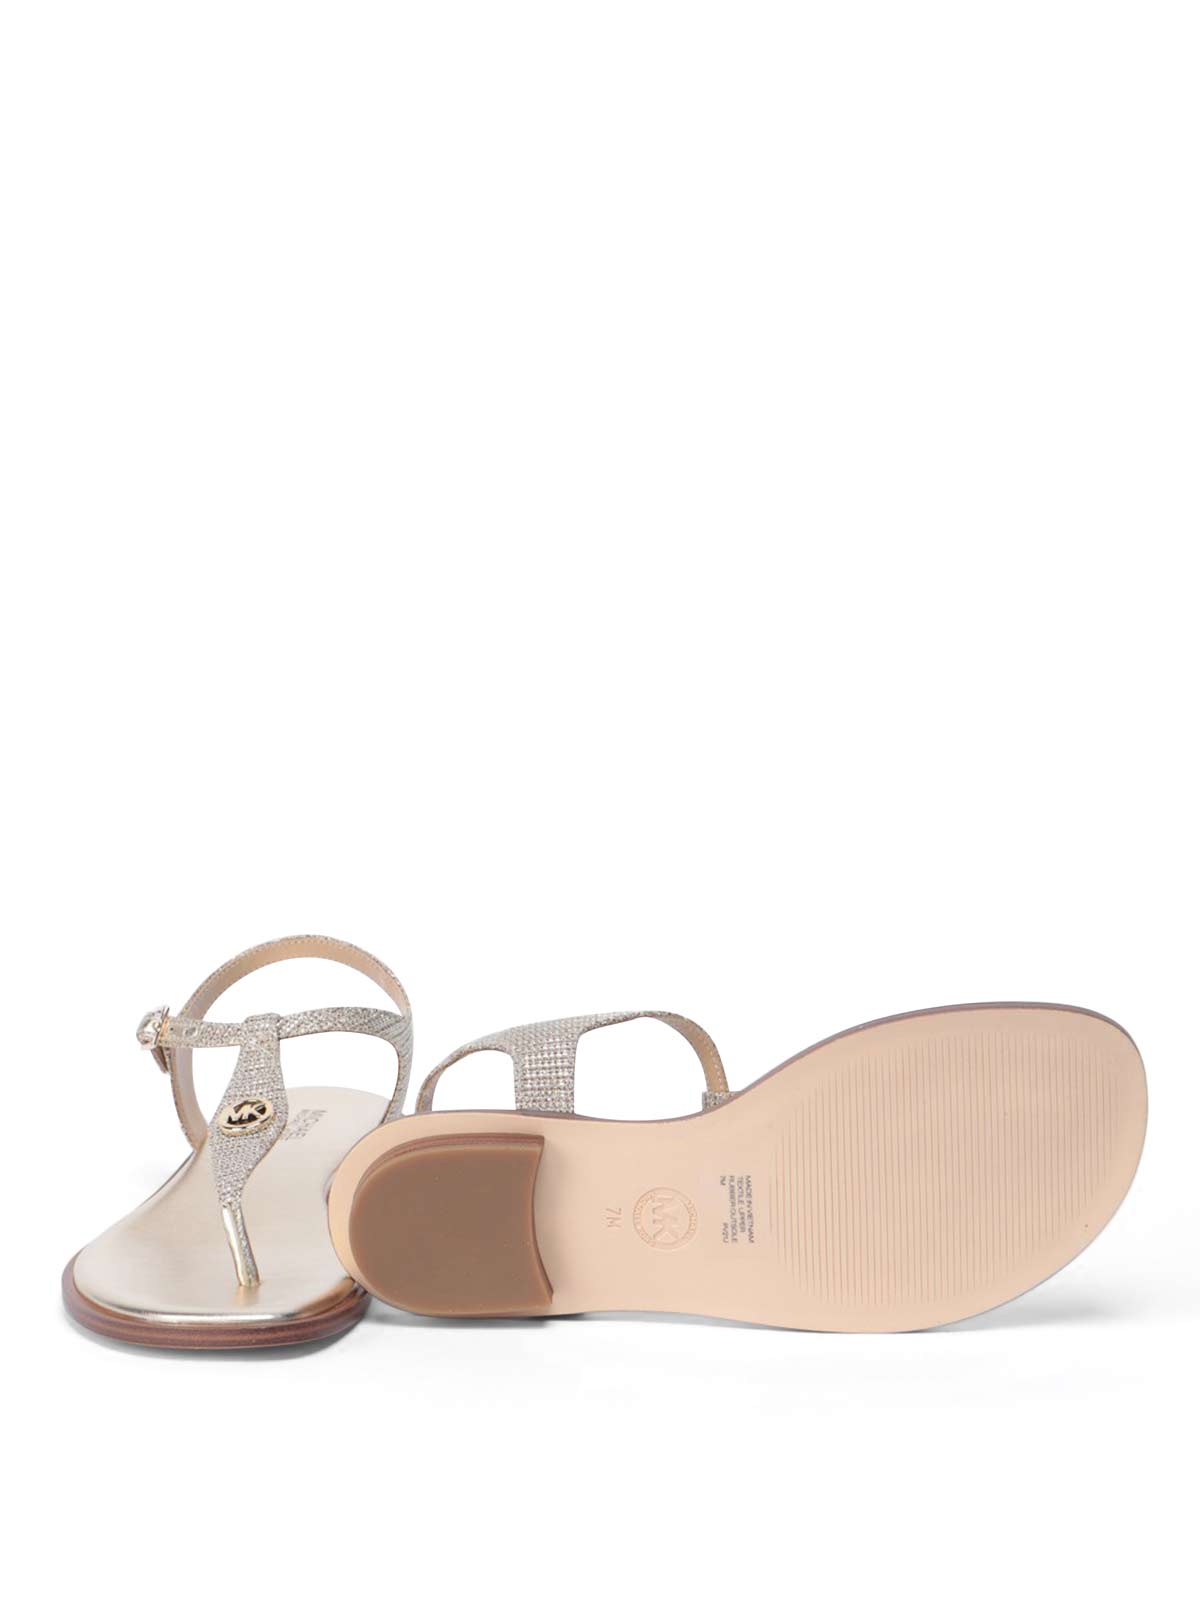 Shop Michael Kors Mallory Thong Sandals In Gold